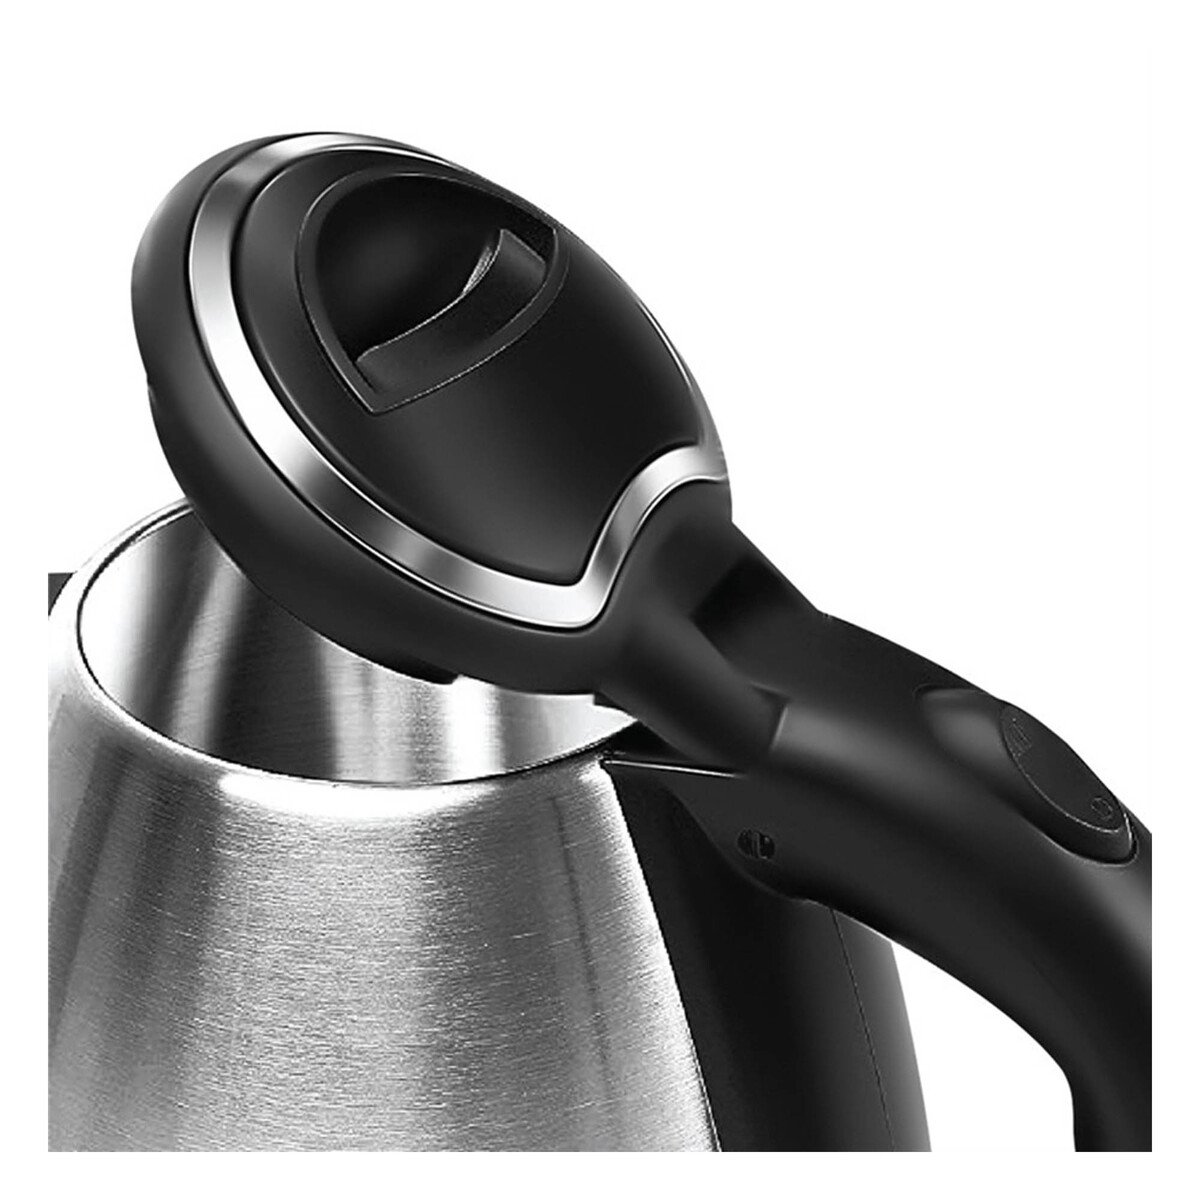 Impex Stainless steel Electric Kettle  Steamer 1803 1.8 Liter